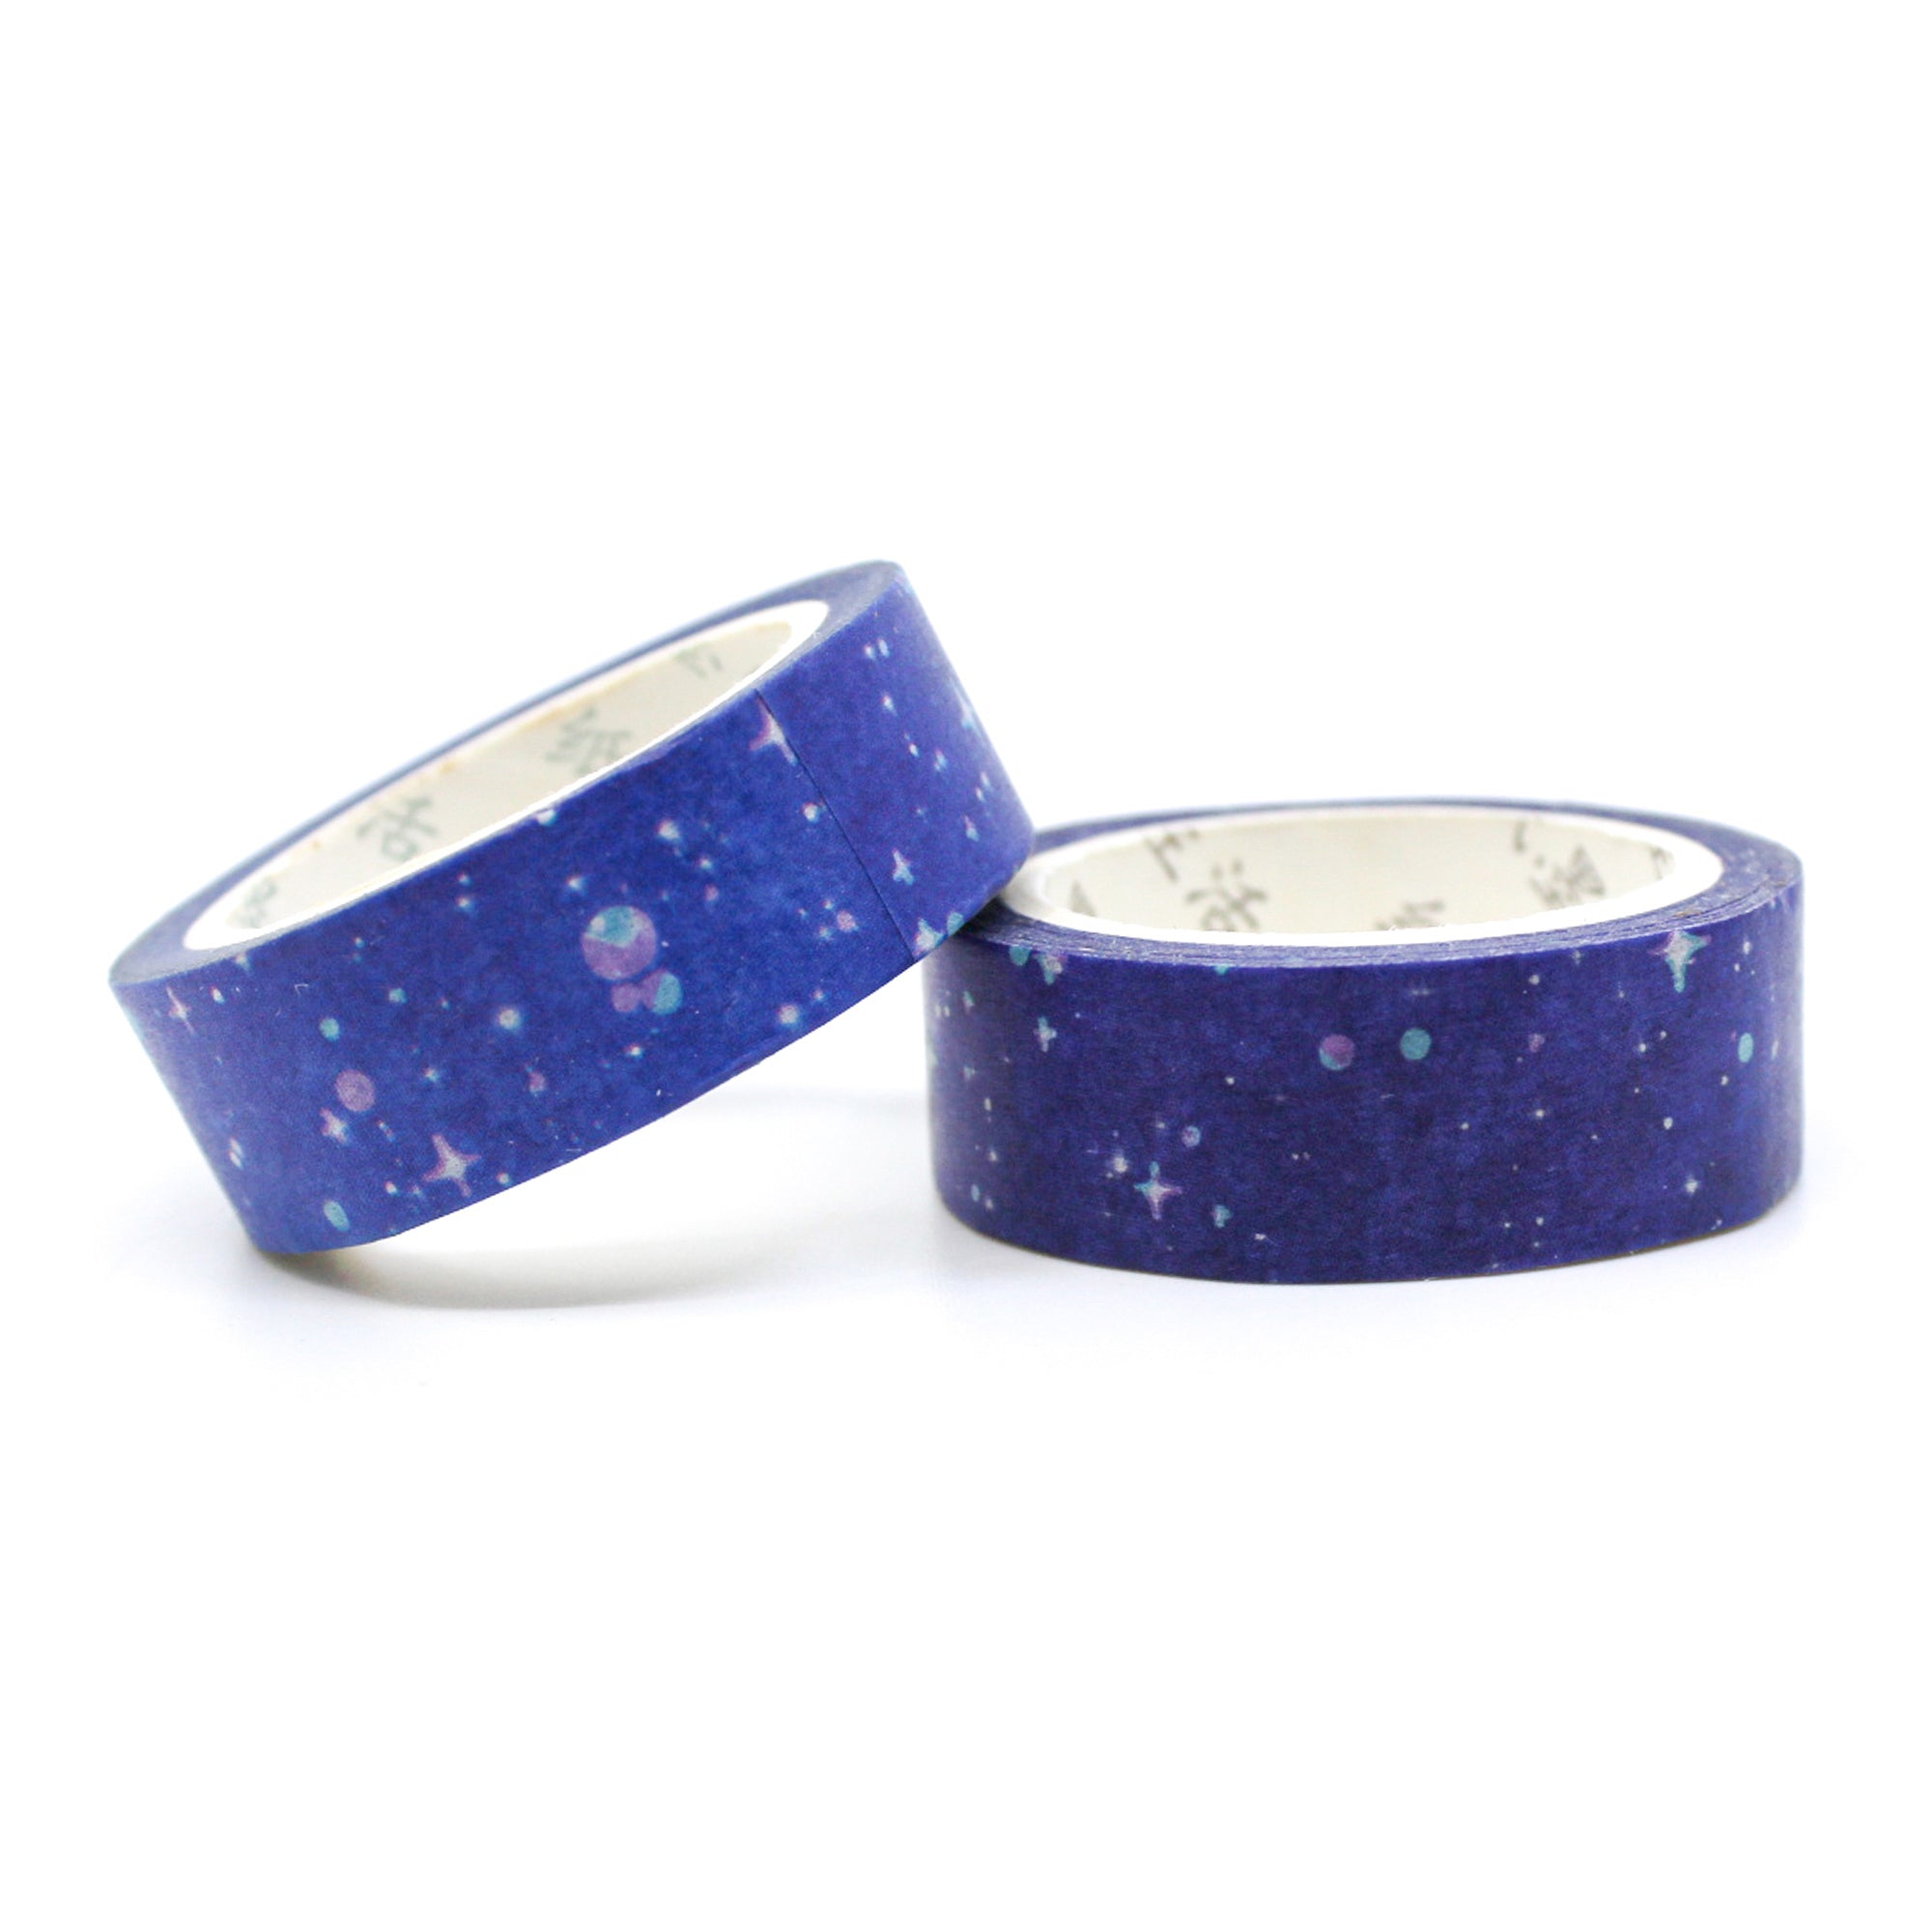 This starry night sky watercolor washi tape is the perfect addition to your washi collection. The simplicity of the pattern is perfect for accenting and matching any project's theme while adding a beautiful and interesting pattern. This tape is sold at BBB Supplies craft shop.